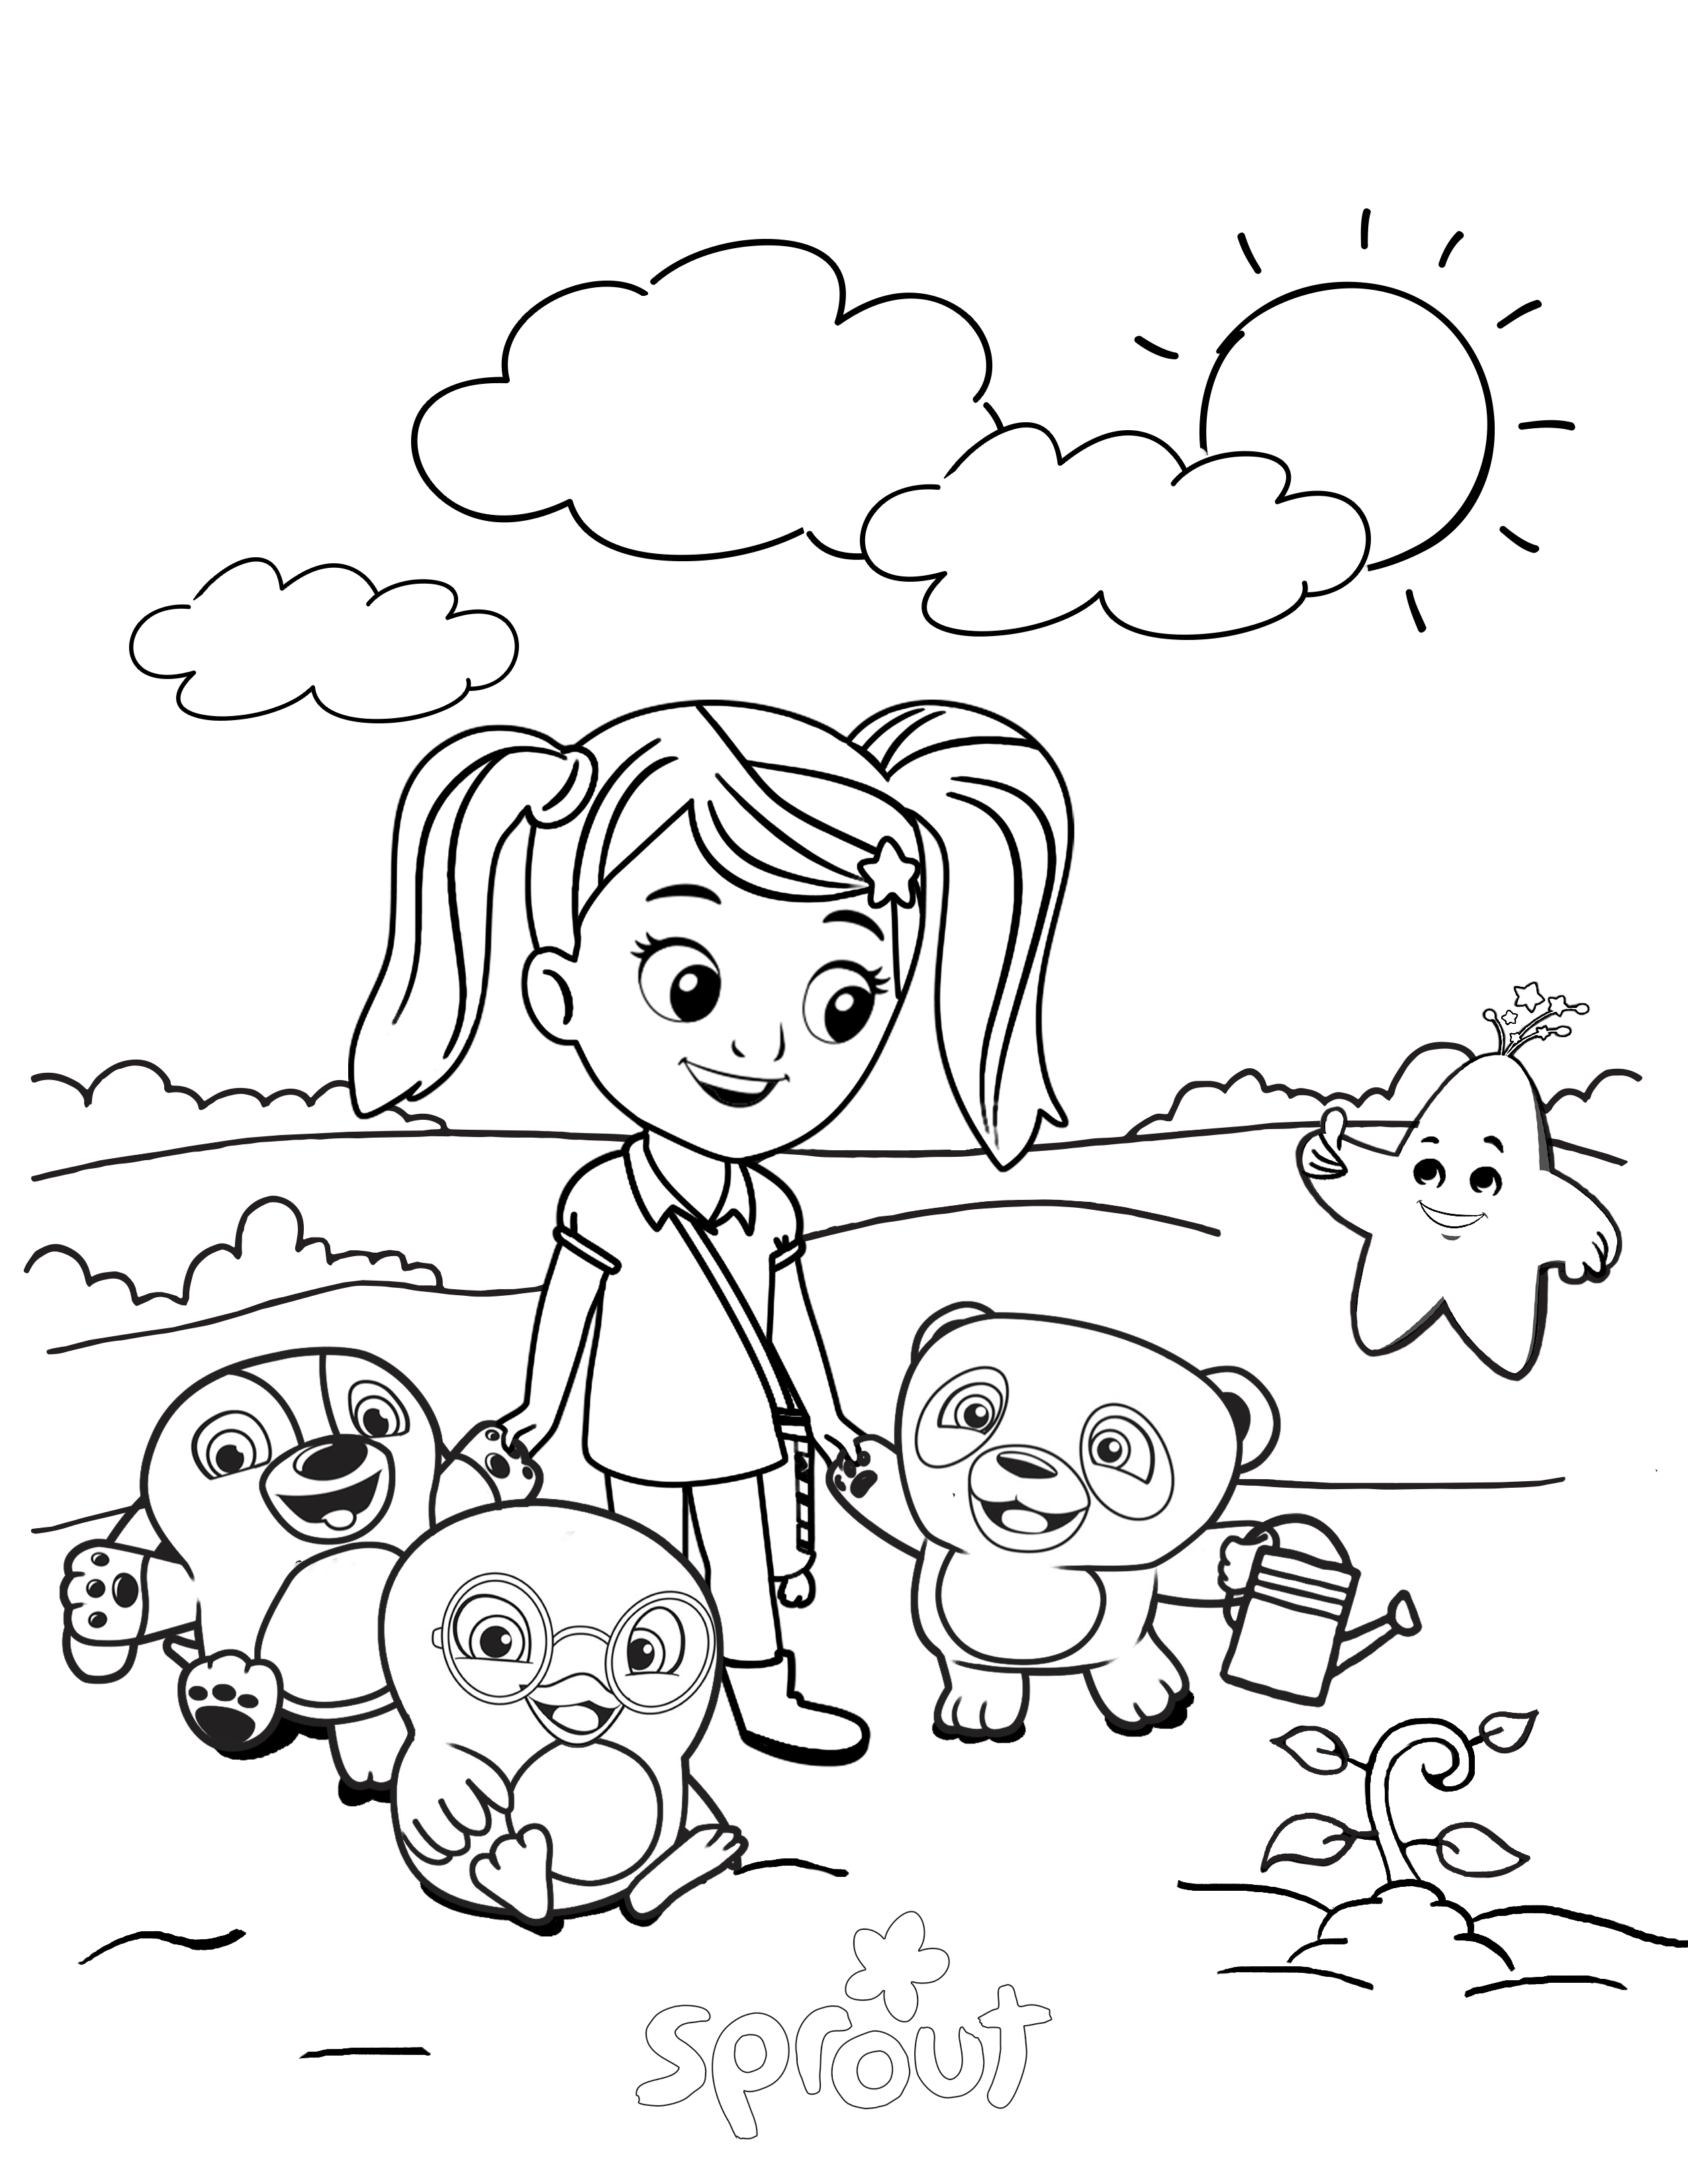 Sprout coloring #10, Download drawings